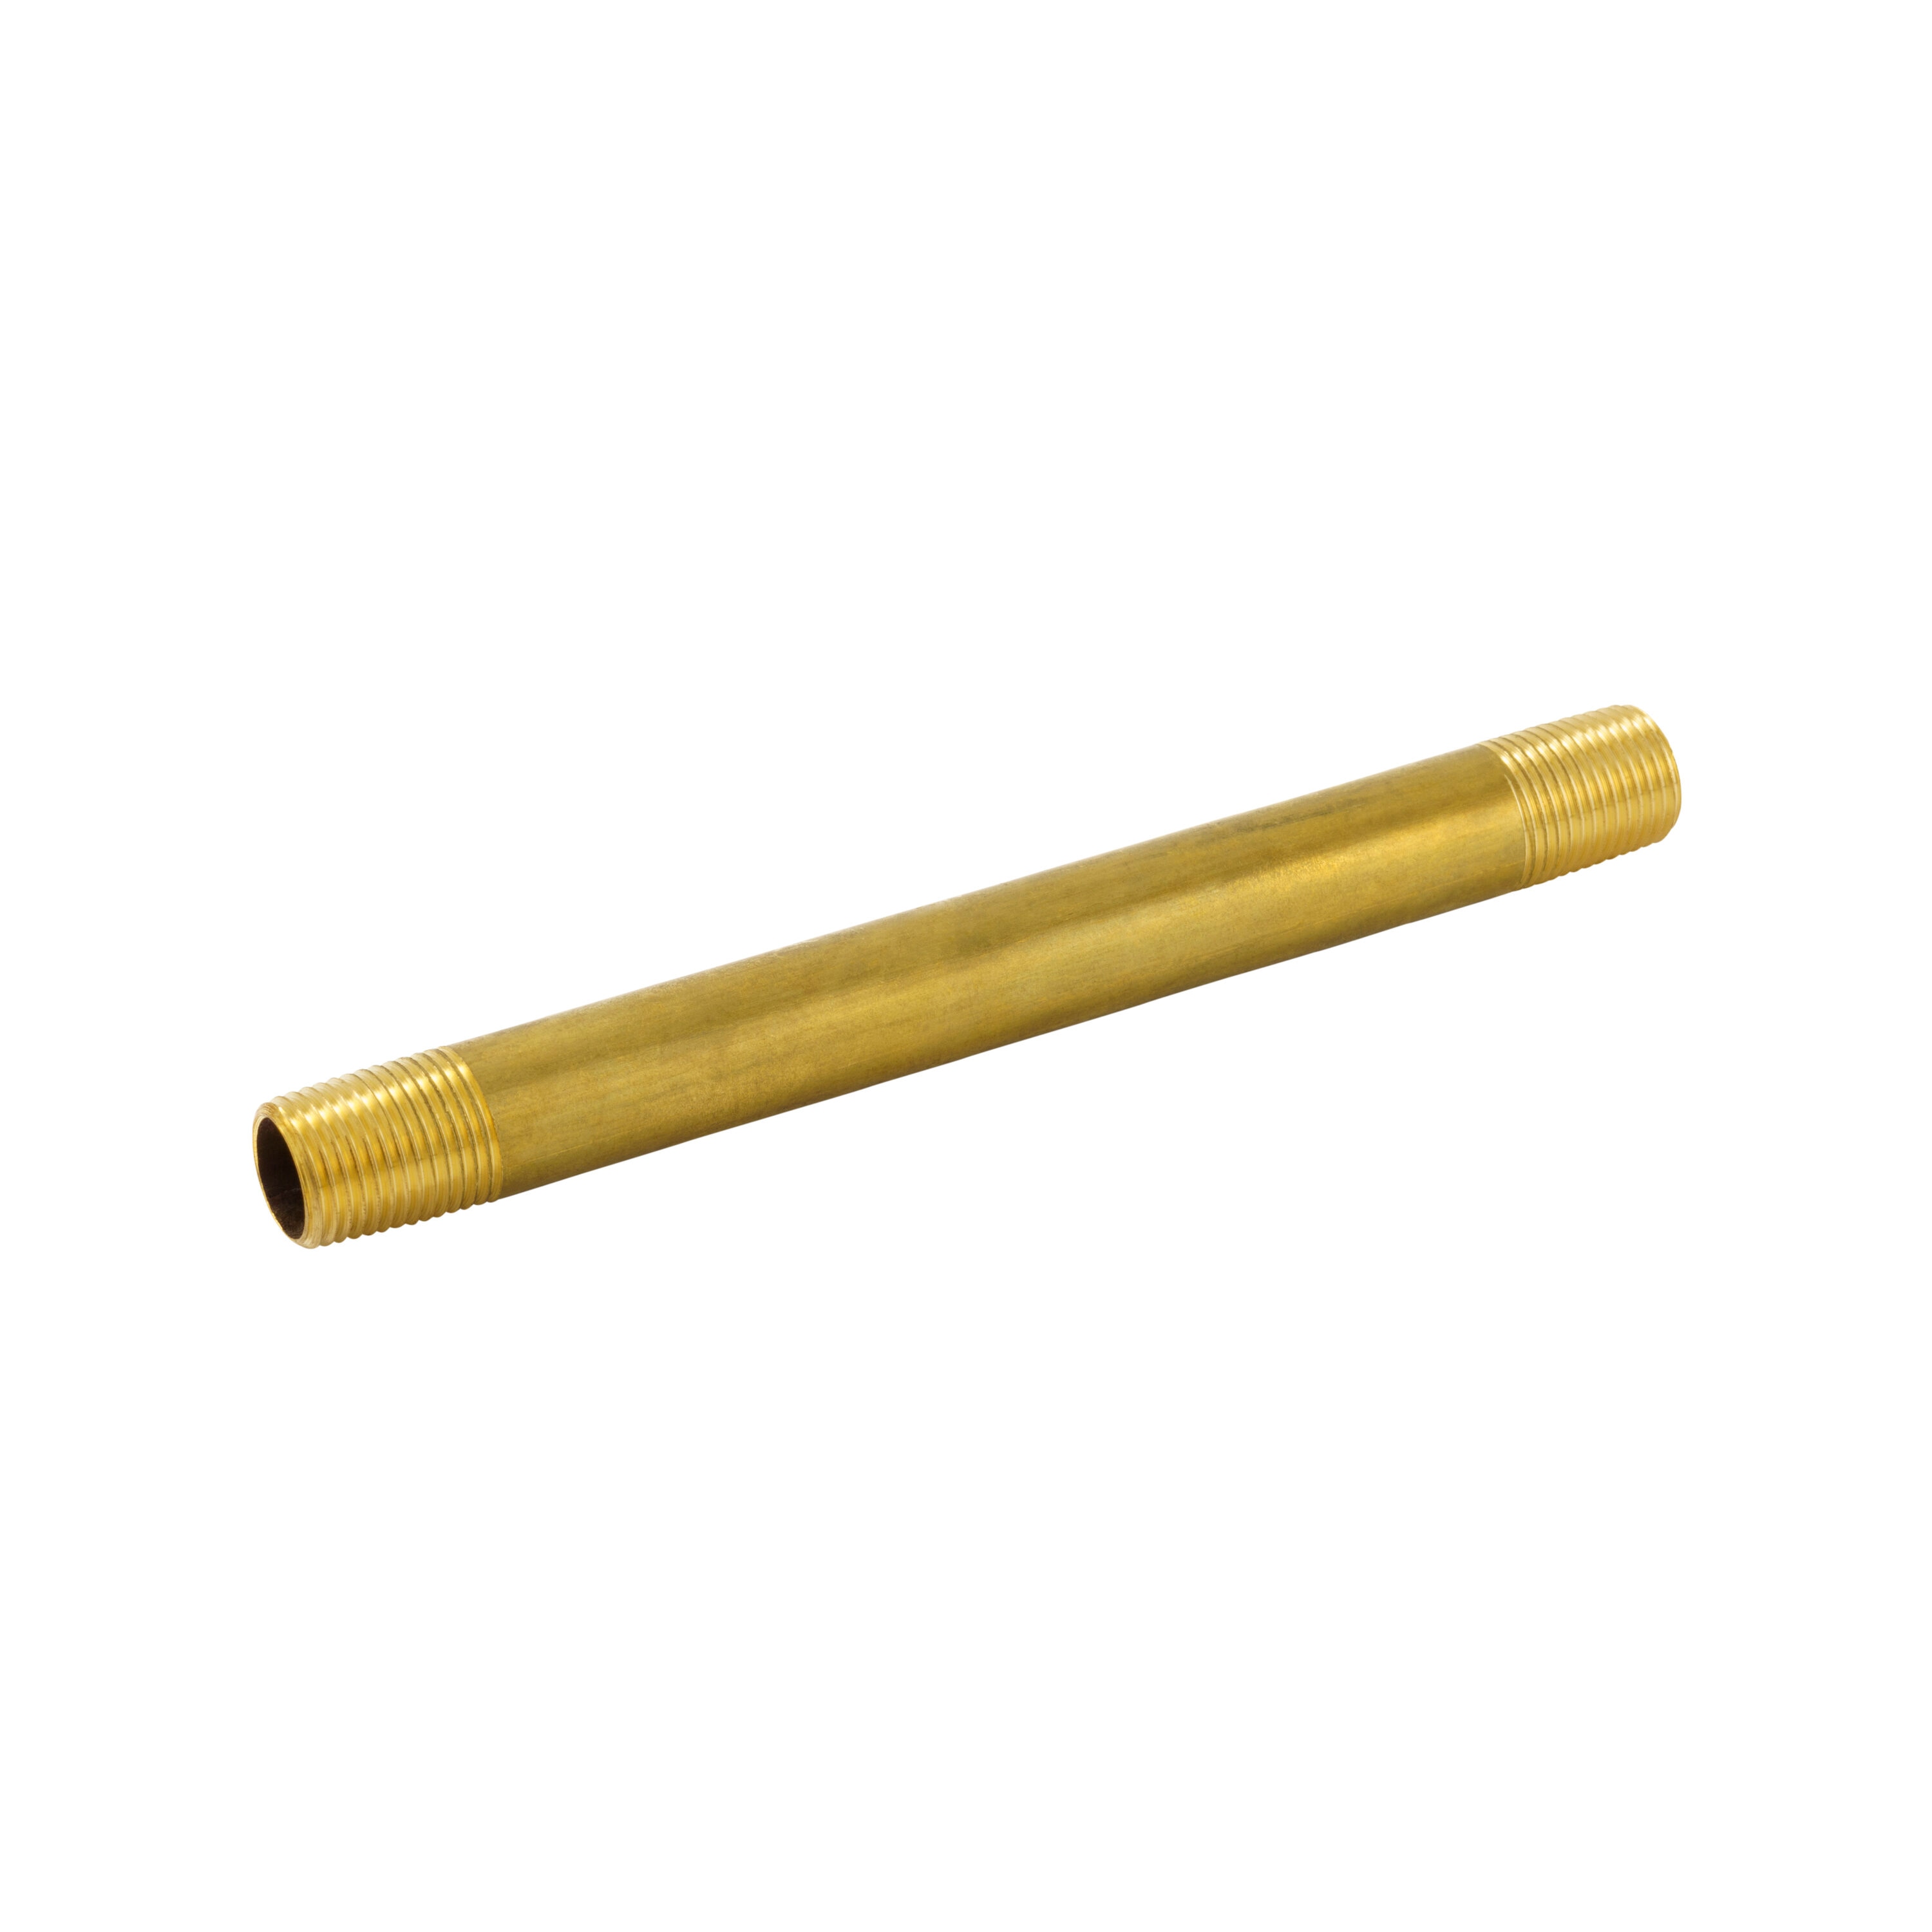 Brass Pipe Fitting, Hex Nipple, 1/2 in. Male NPT, Nipples, Pipe Fittings, Fittings, All Products